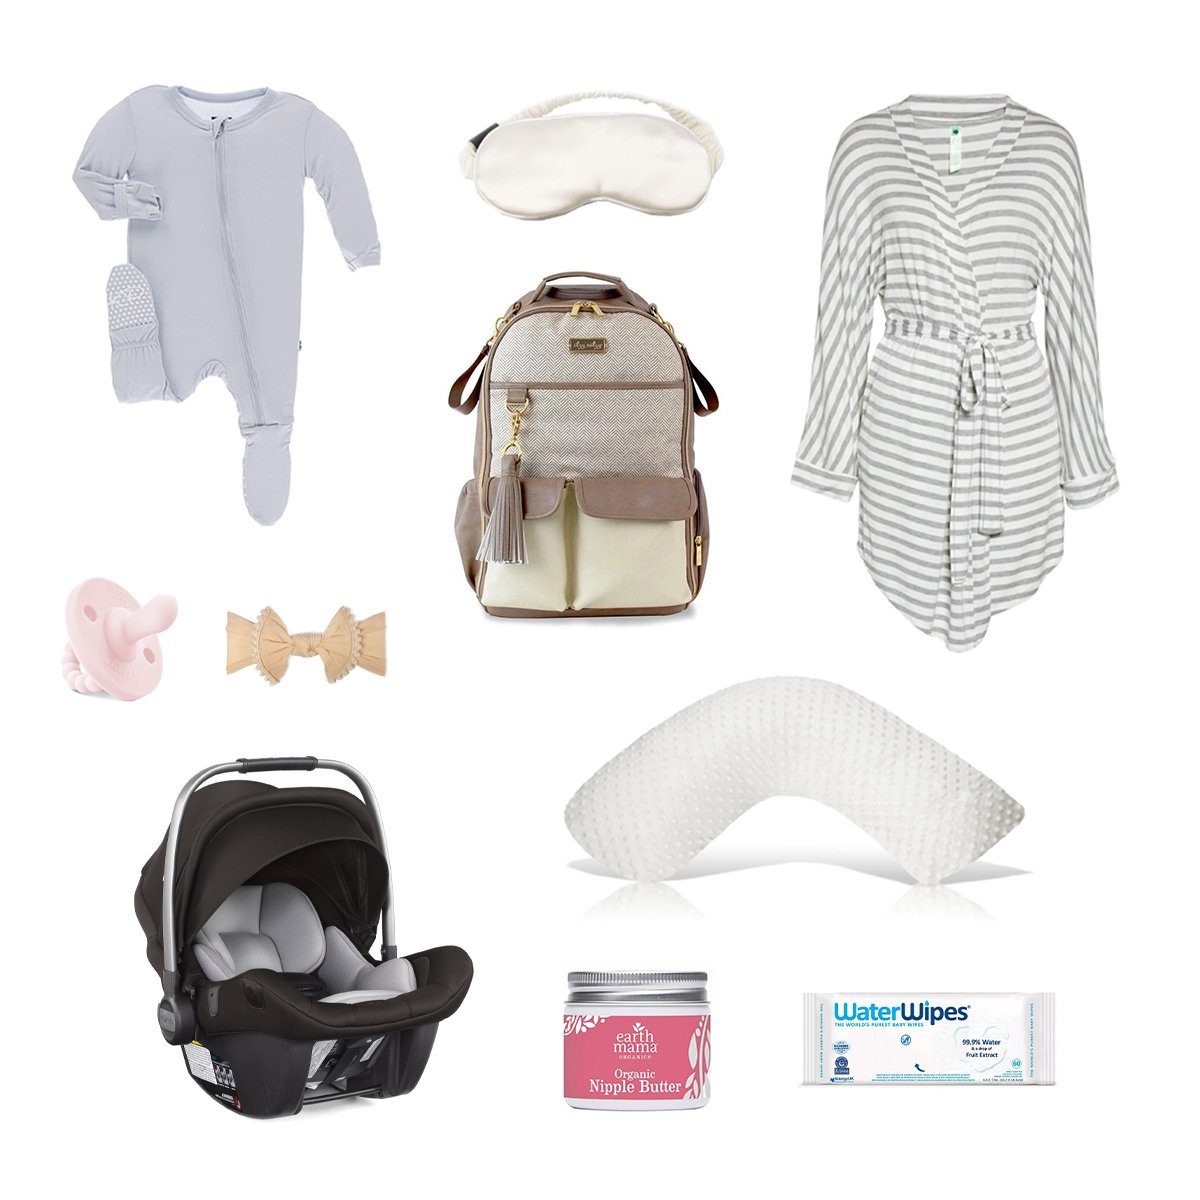 Labor and Delivery Hospital Bag Must Haves - by rachel regal